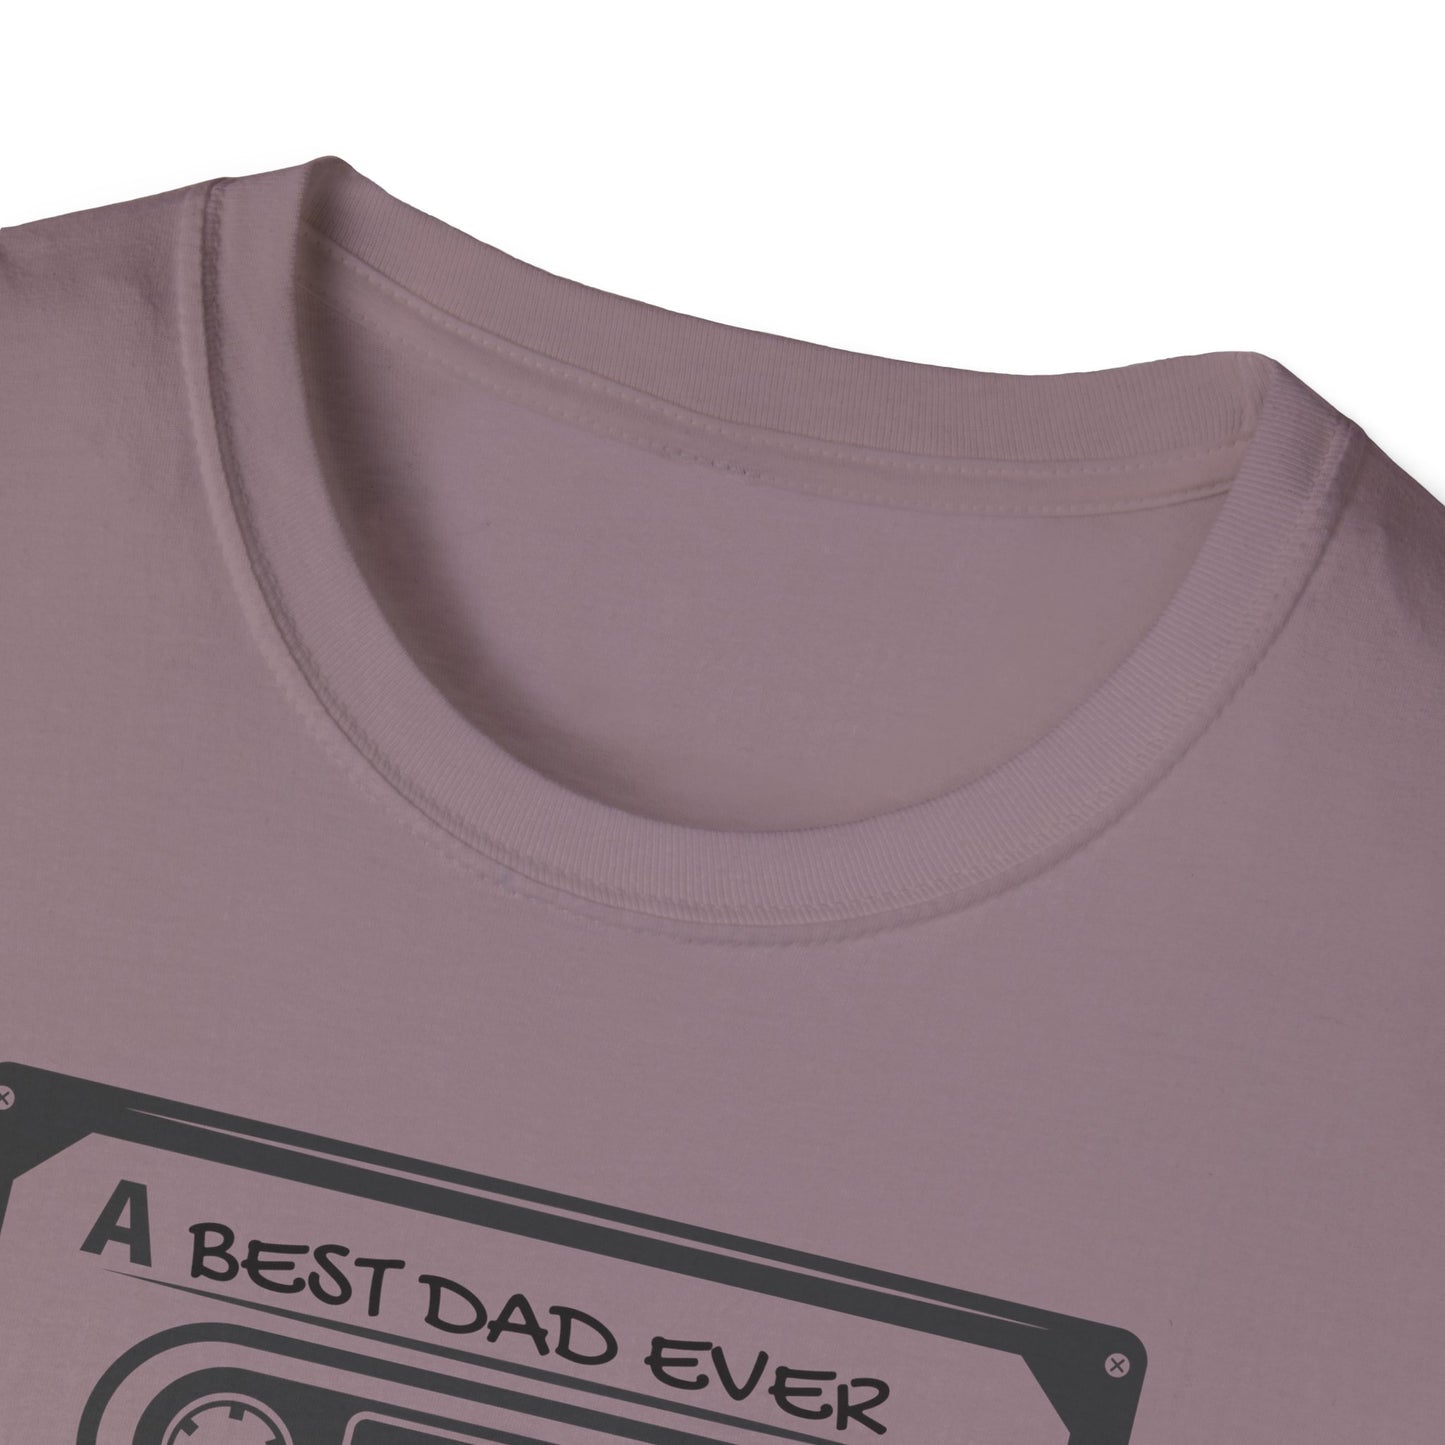 Best Dad Ever Mixtape Tee for Rocker Musician Dad Gift for Father's Day Music Lover T-shirt Retro Dad Vibes Tshirt Softstyle 100% Cotton